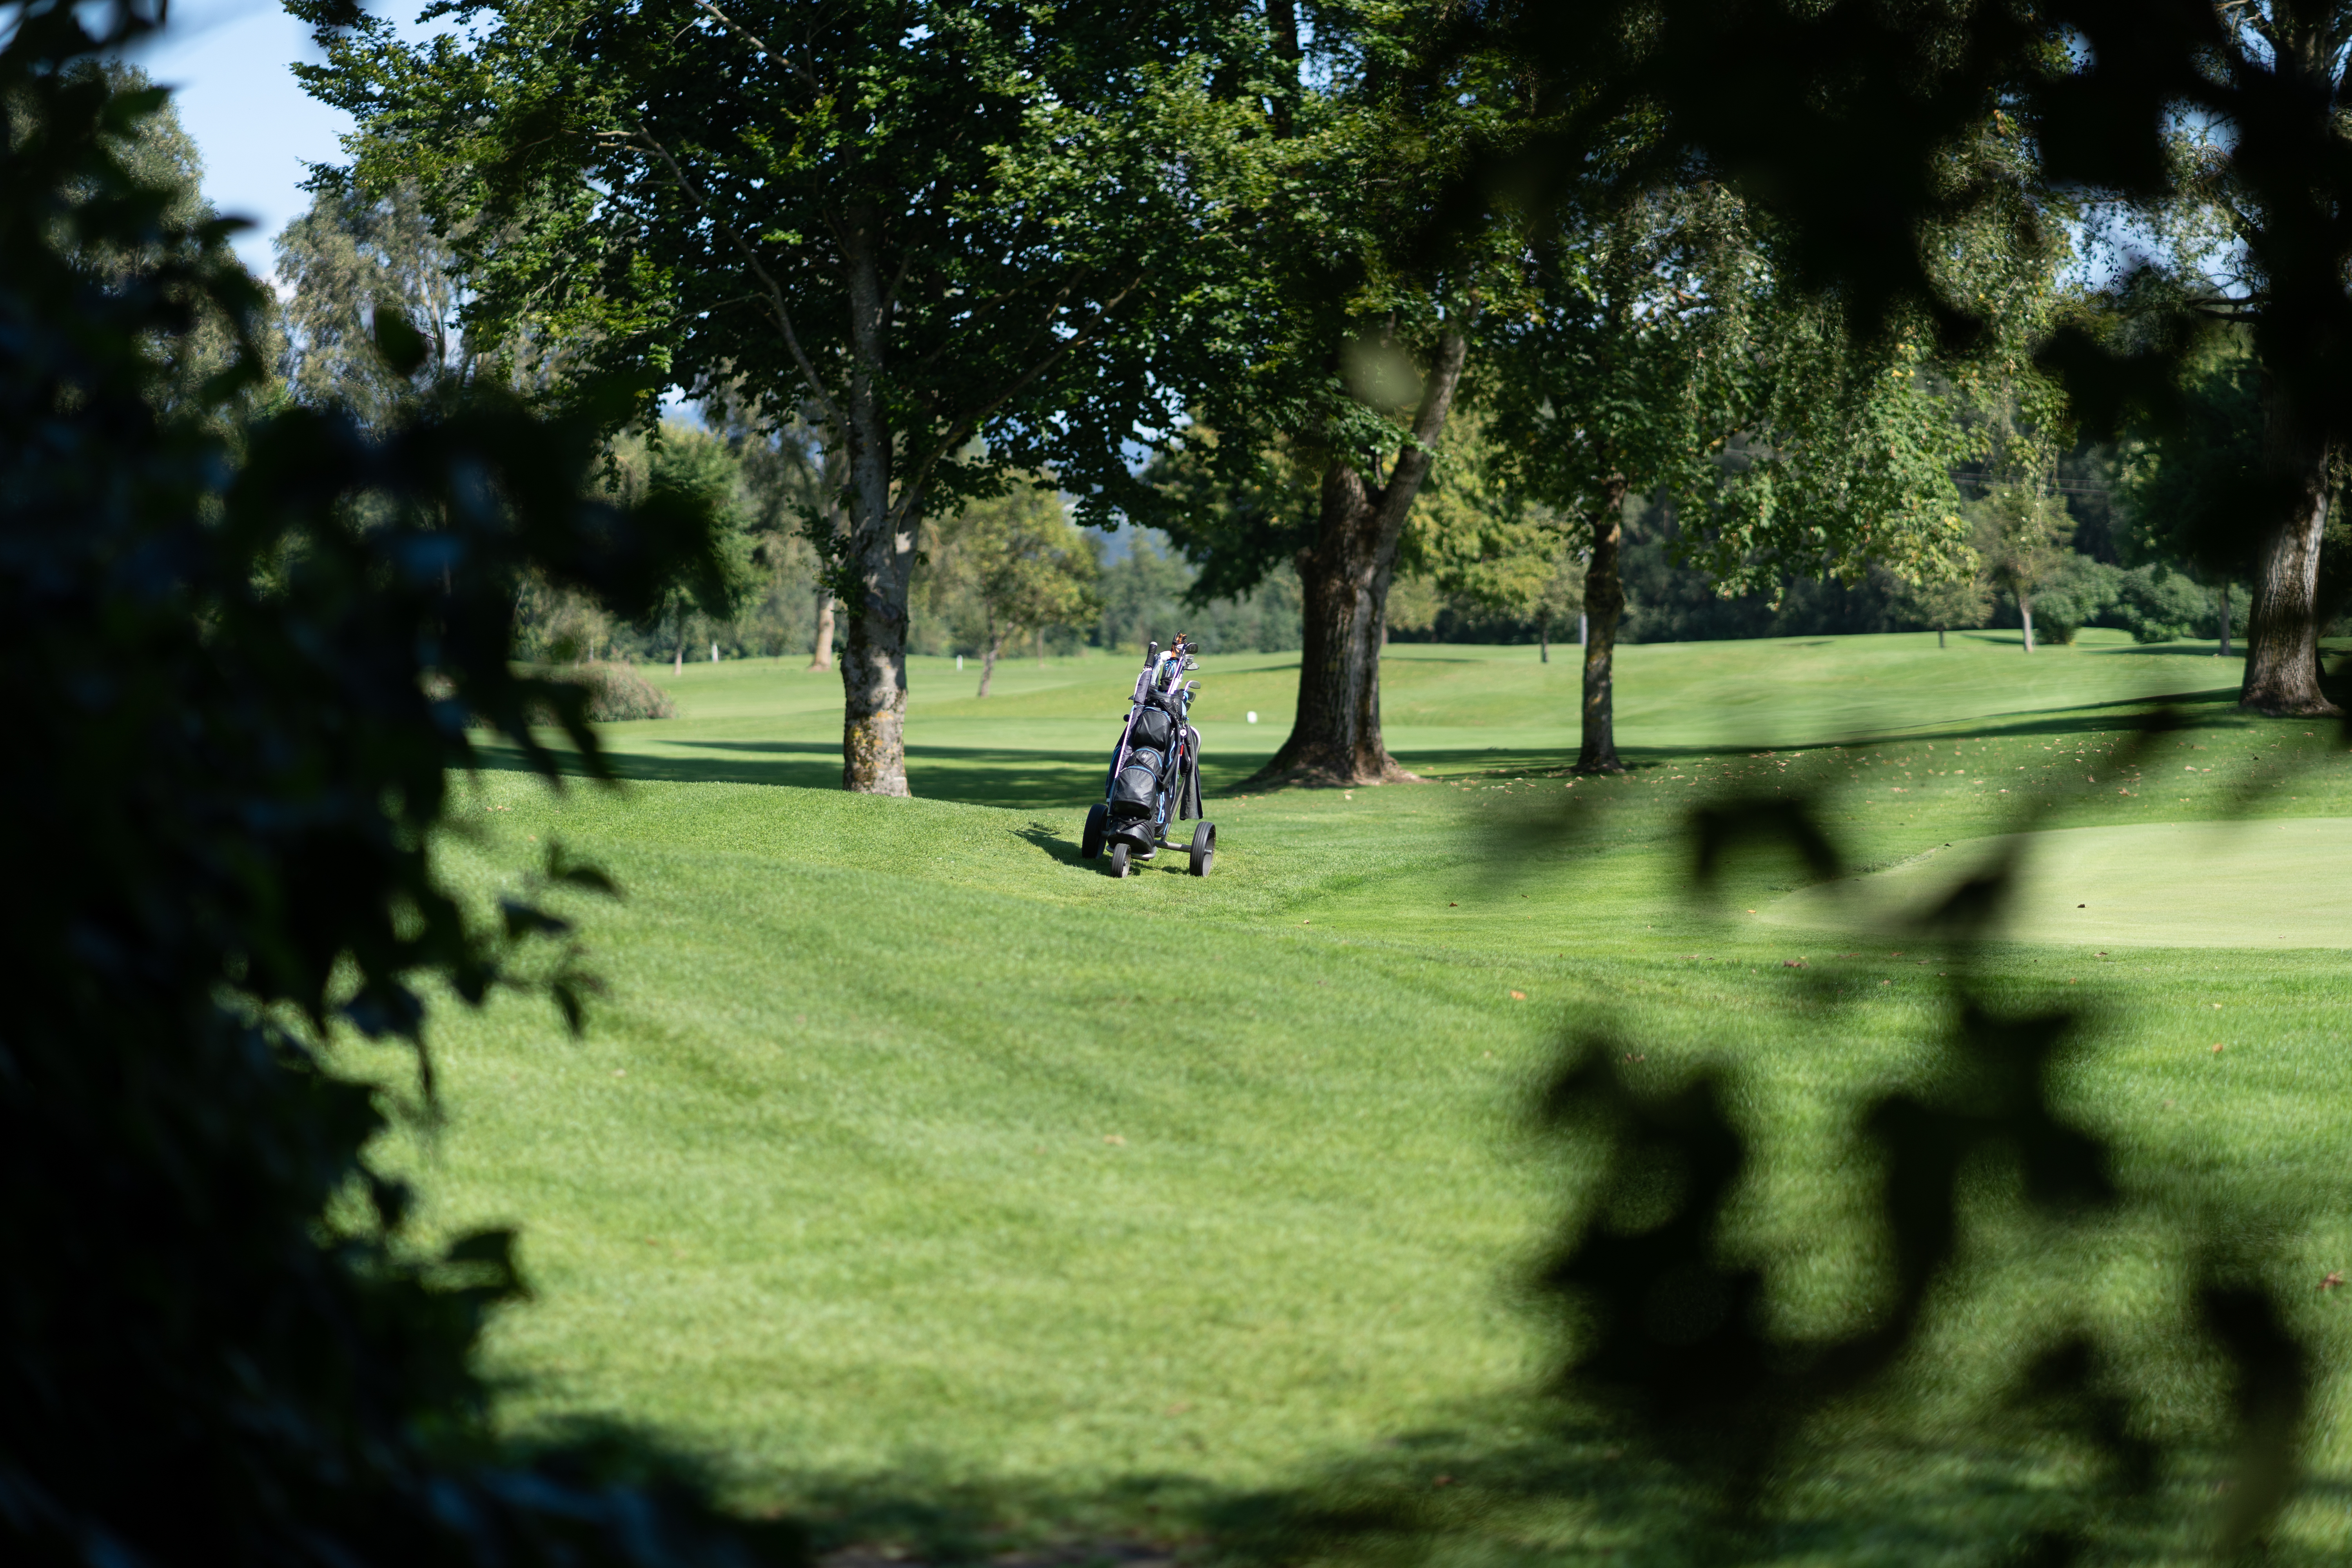 A golf bag on a golf course looking through some green trees